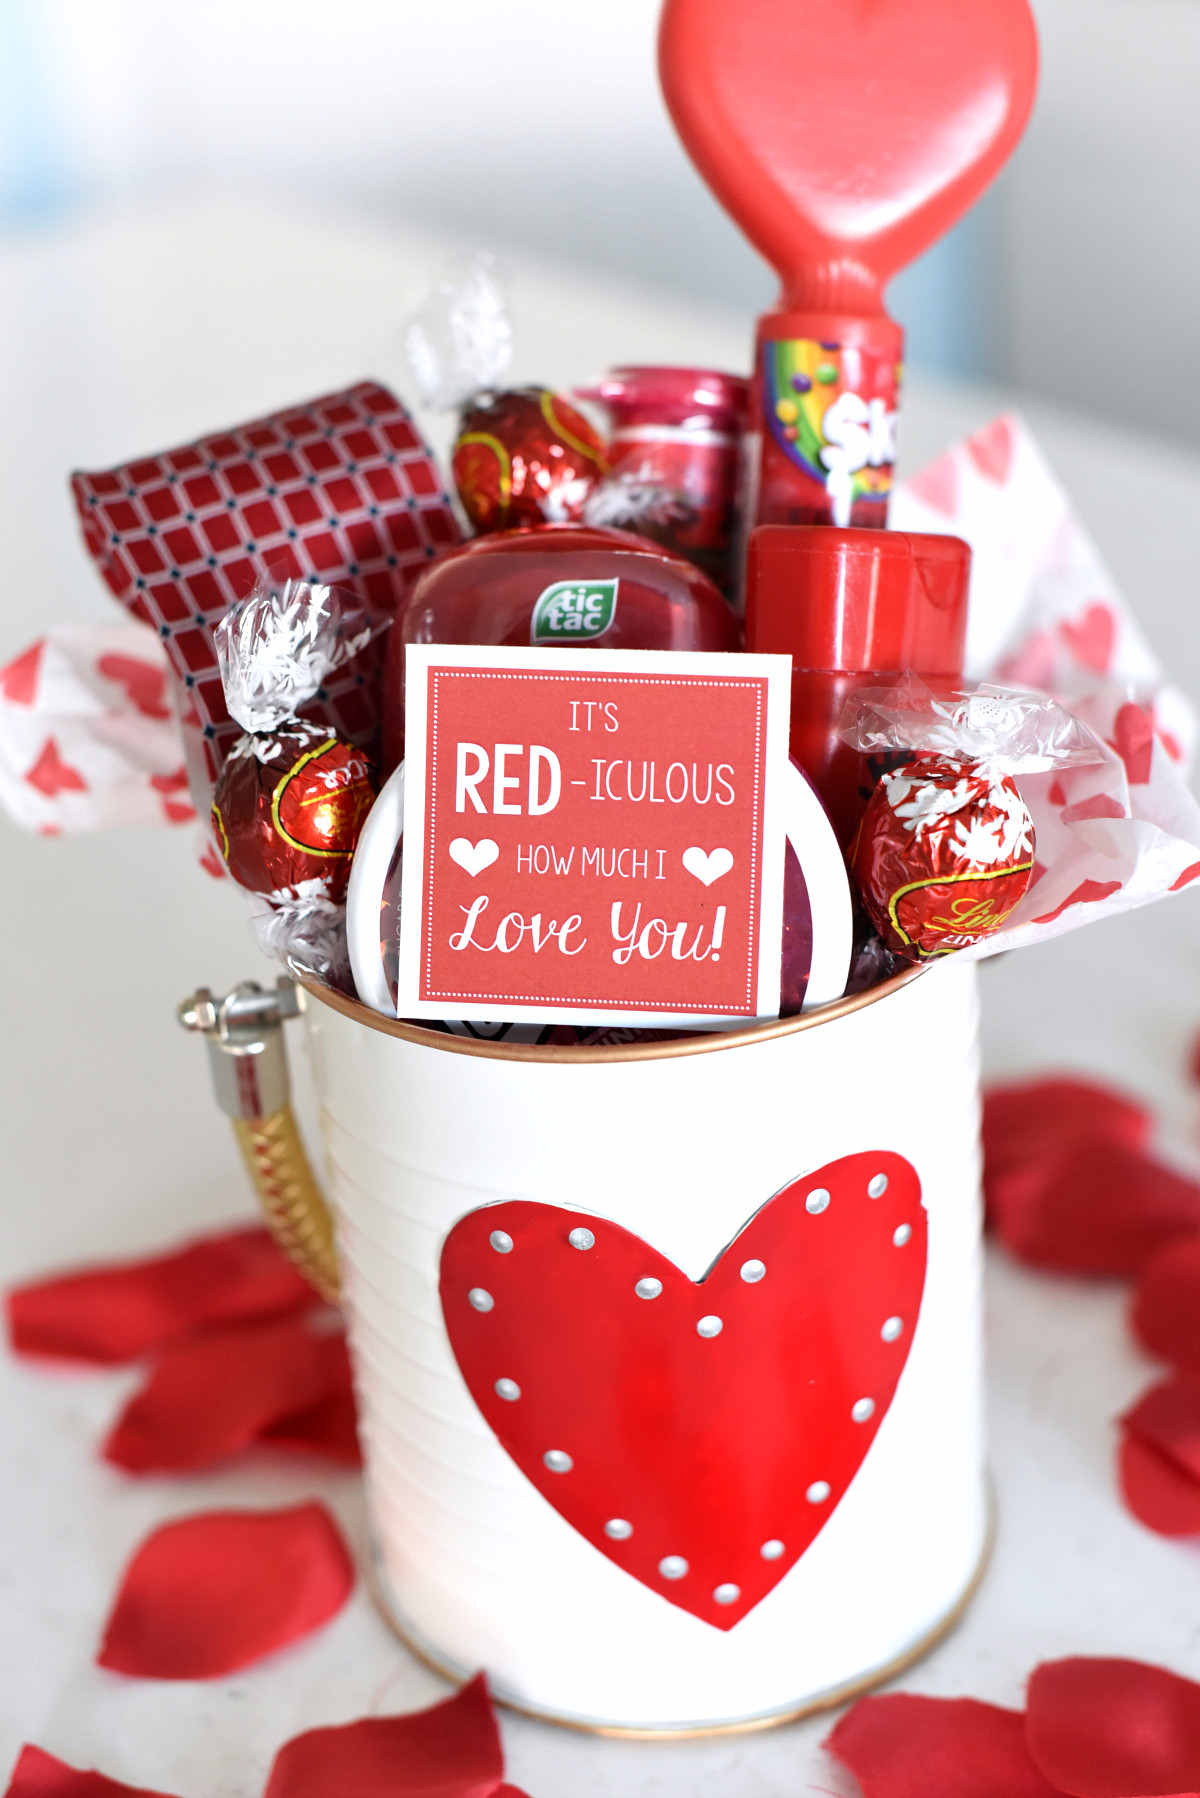 Homemade Valentine Gift Ideas For Her
 25 DIY Valentine s Day Gift Ideas Teens Will Love